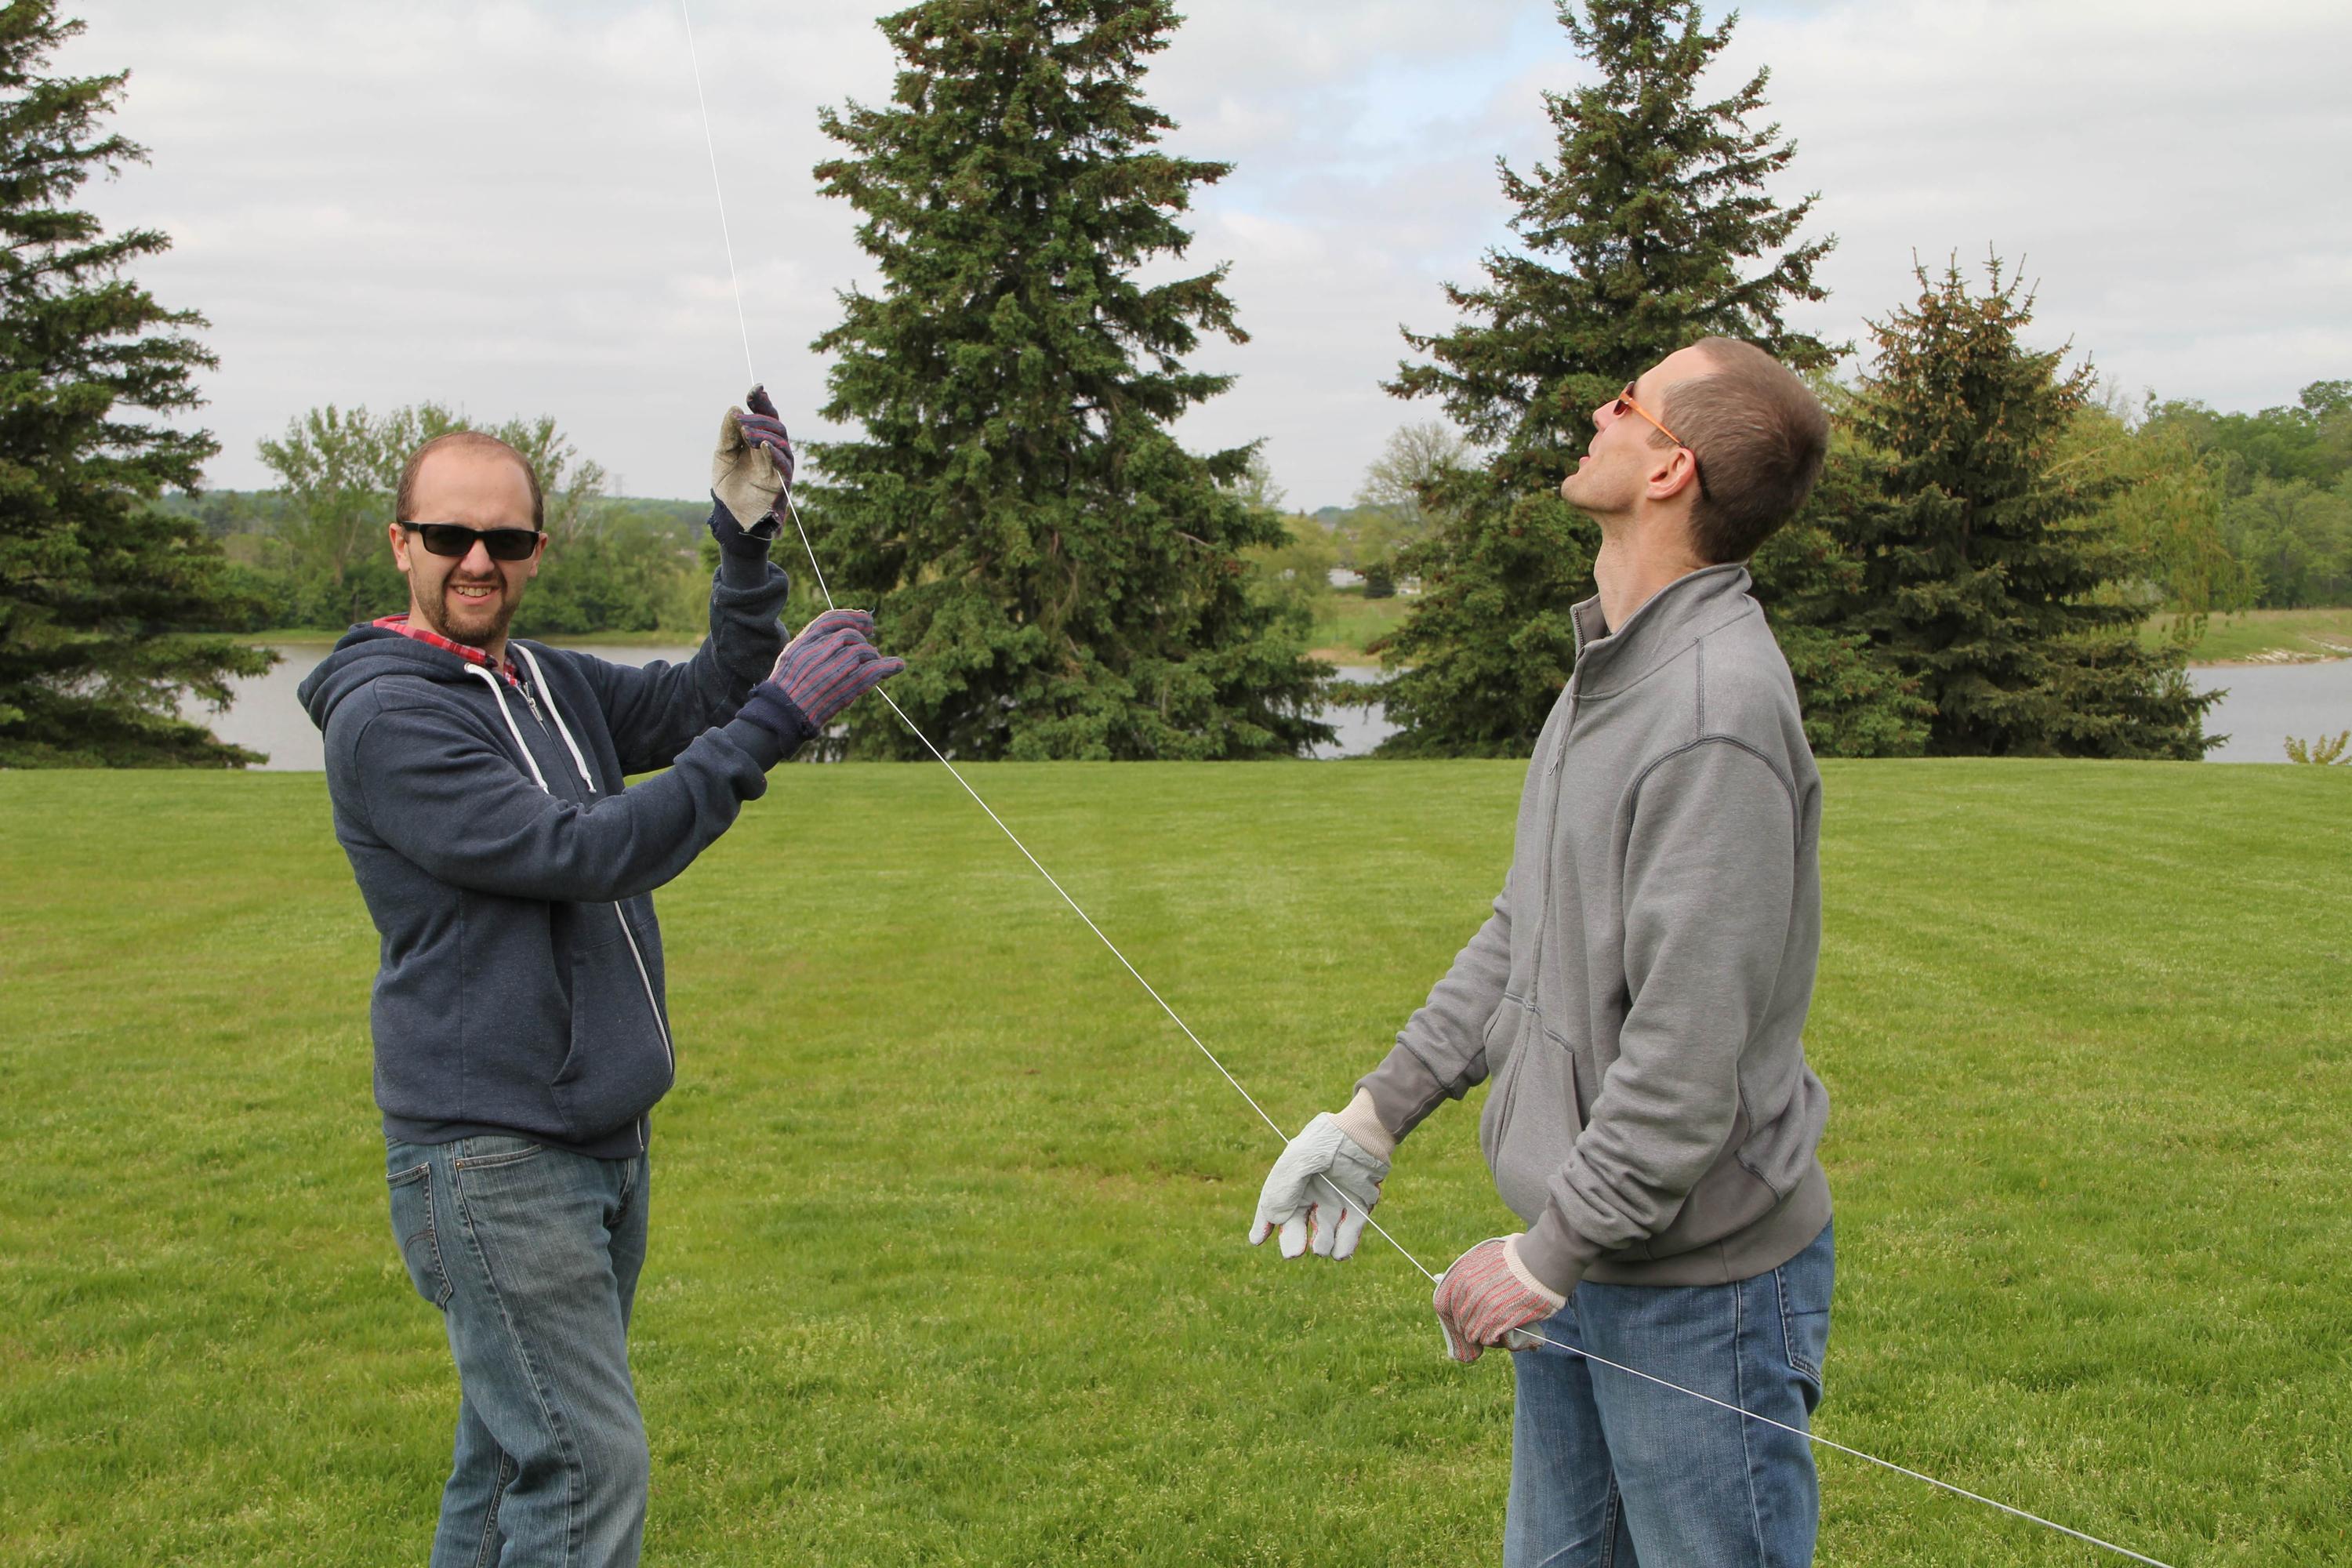 James and Mike controlling the balloon line.